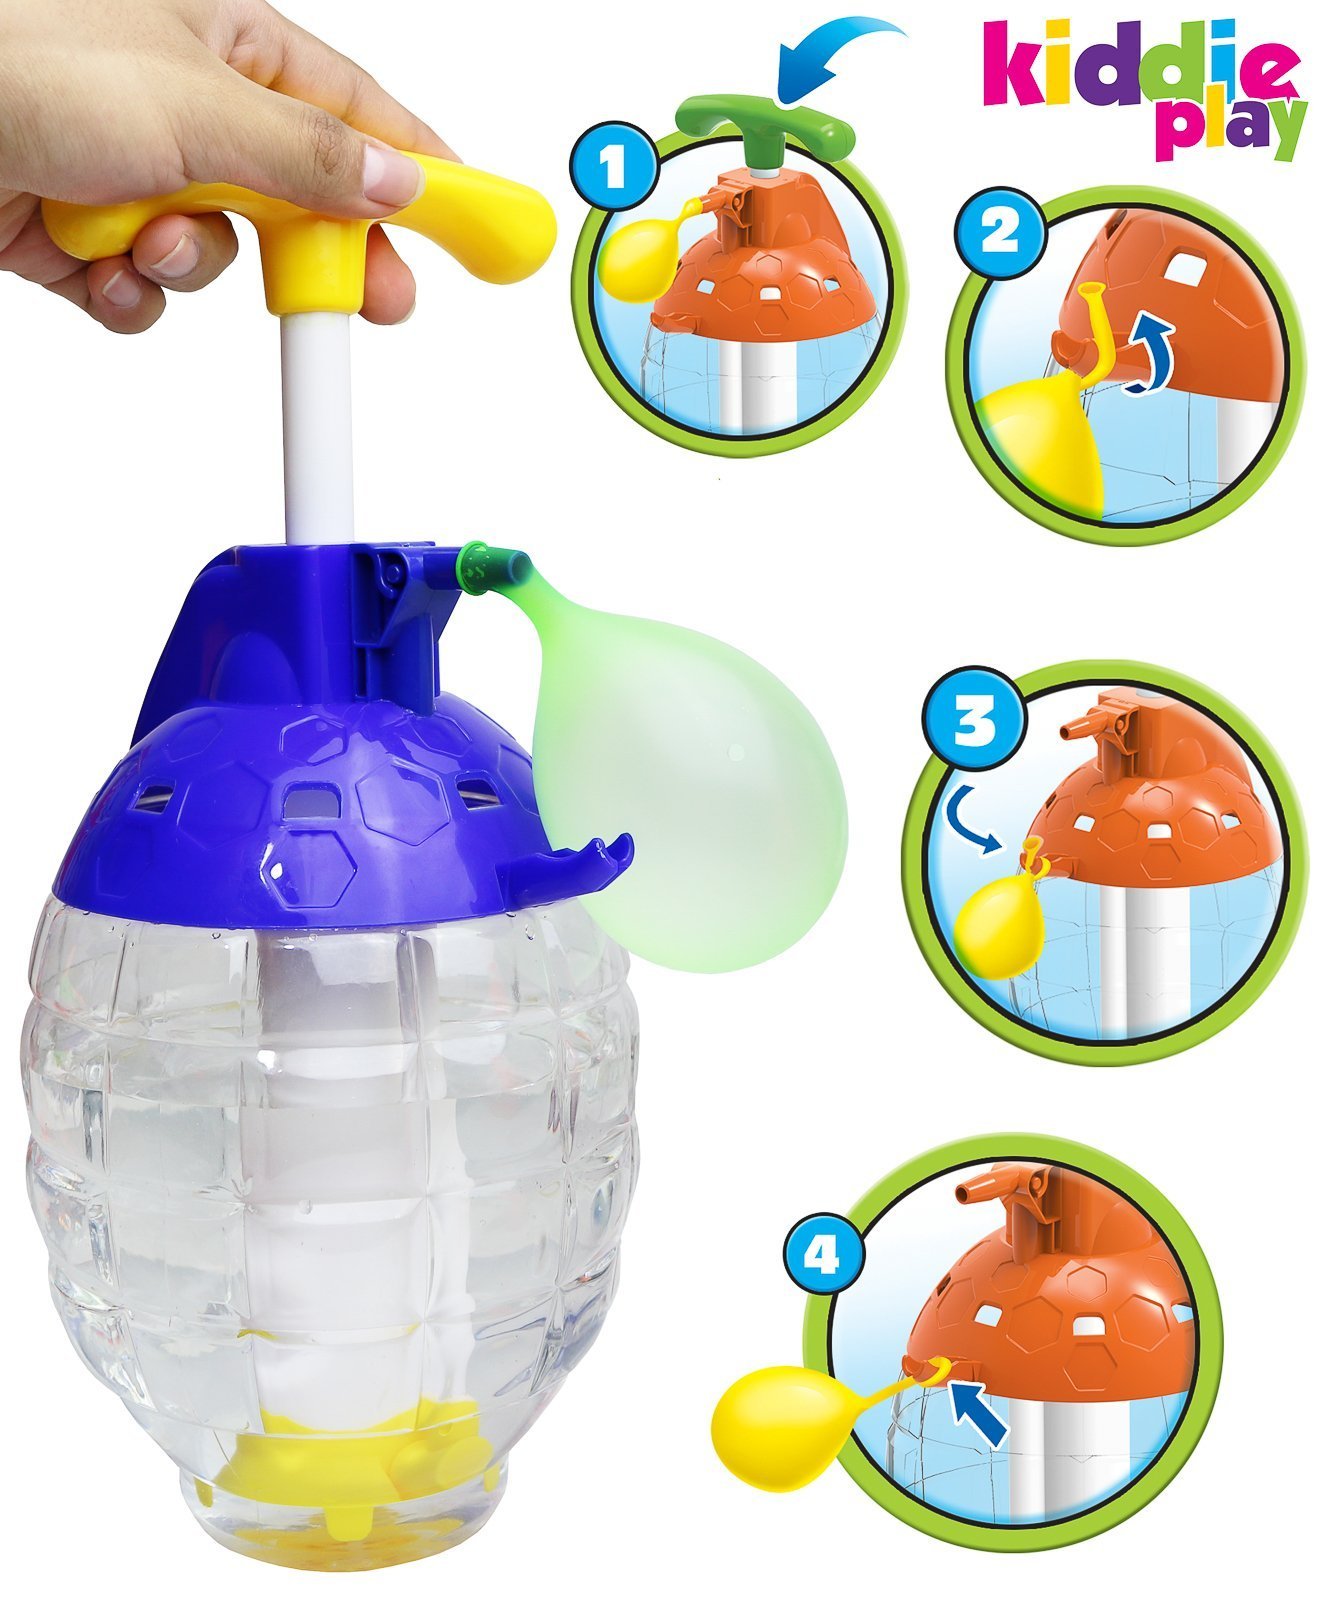 Kiddie Play Water Balloons For Kids With Filler Pump (500 Balloons) - image 4 of 4